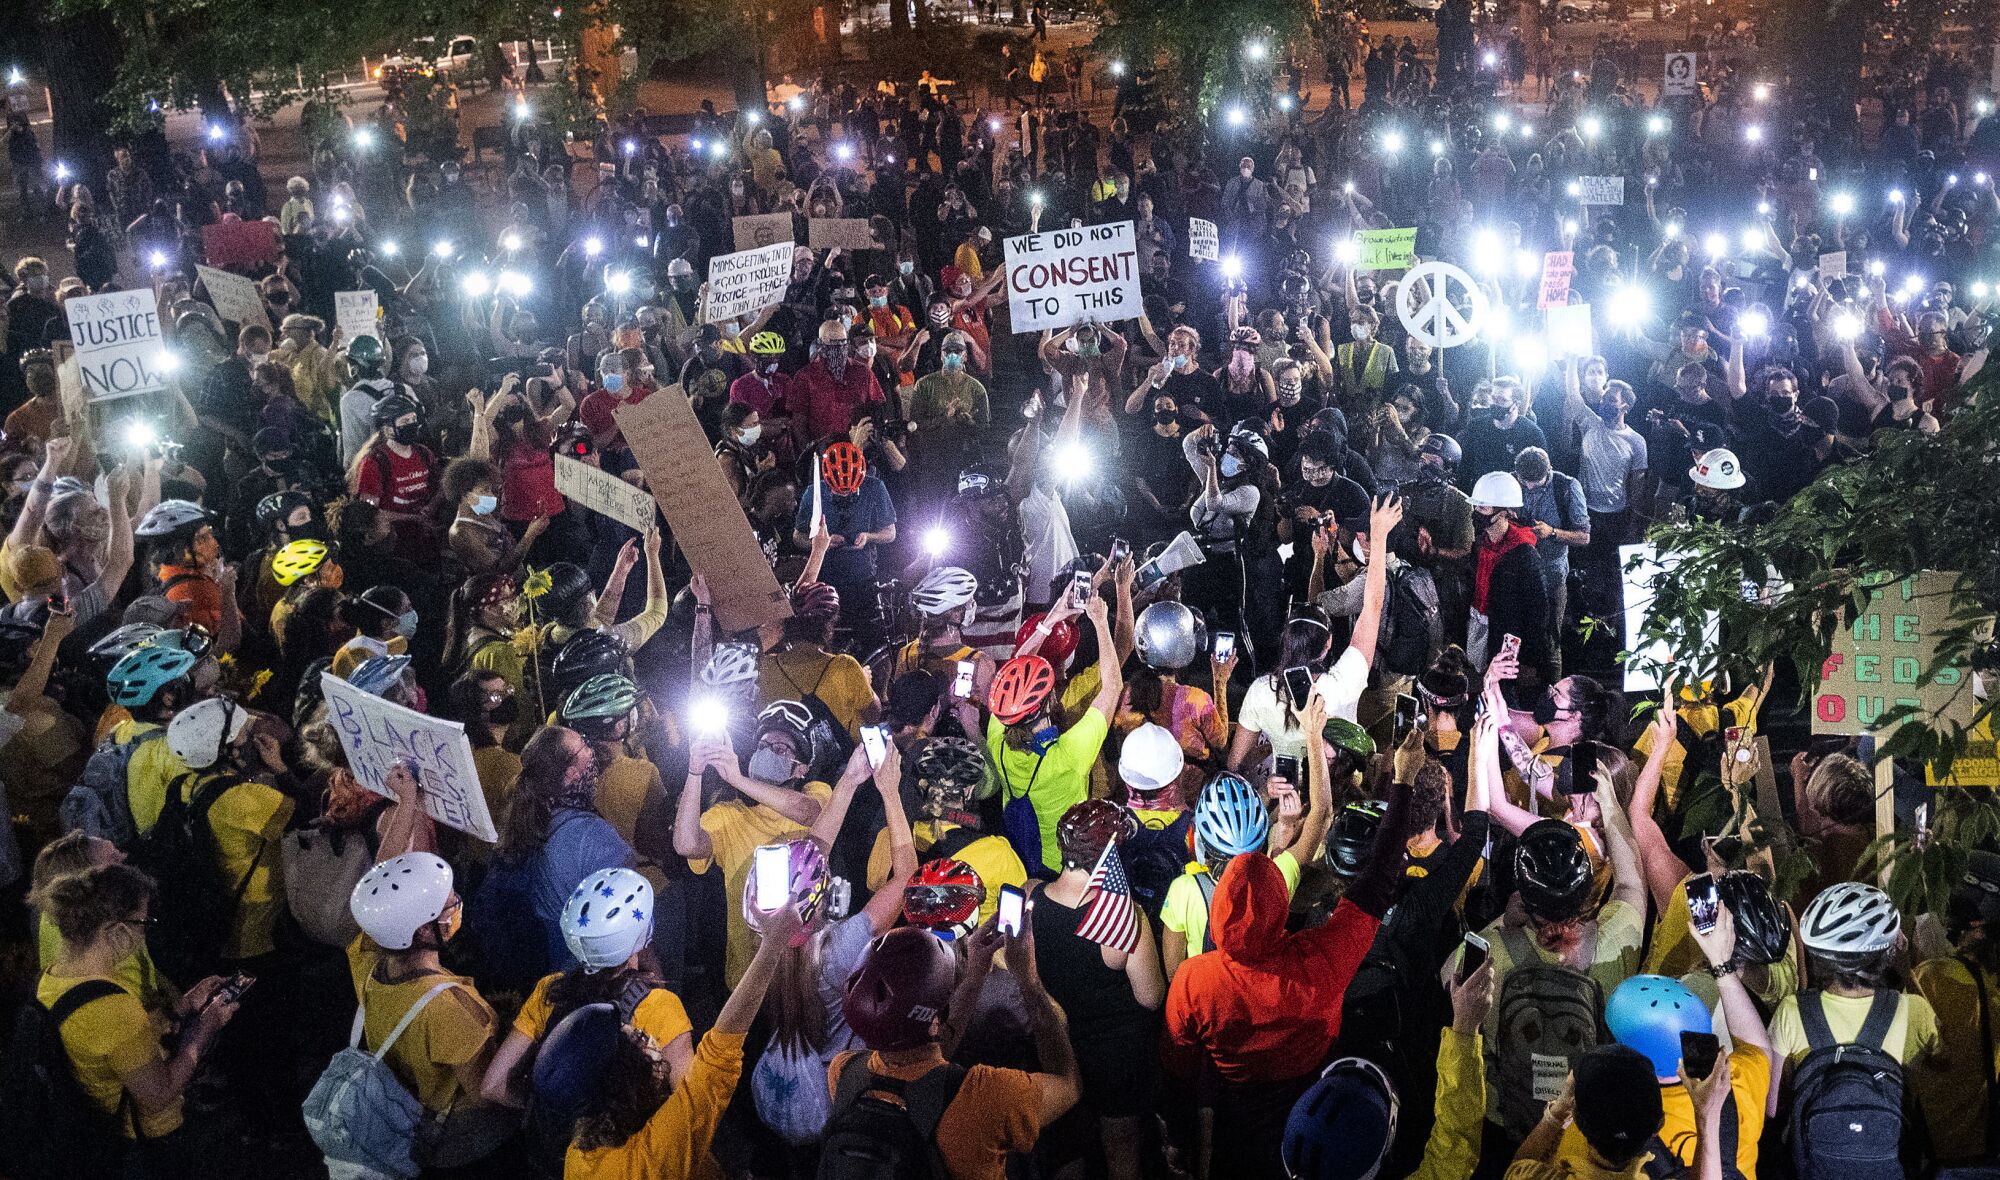 Protesters in bike helmets hold up signs and illuminated cellphones at a nighttime rally